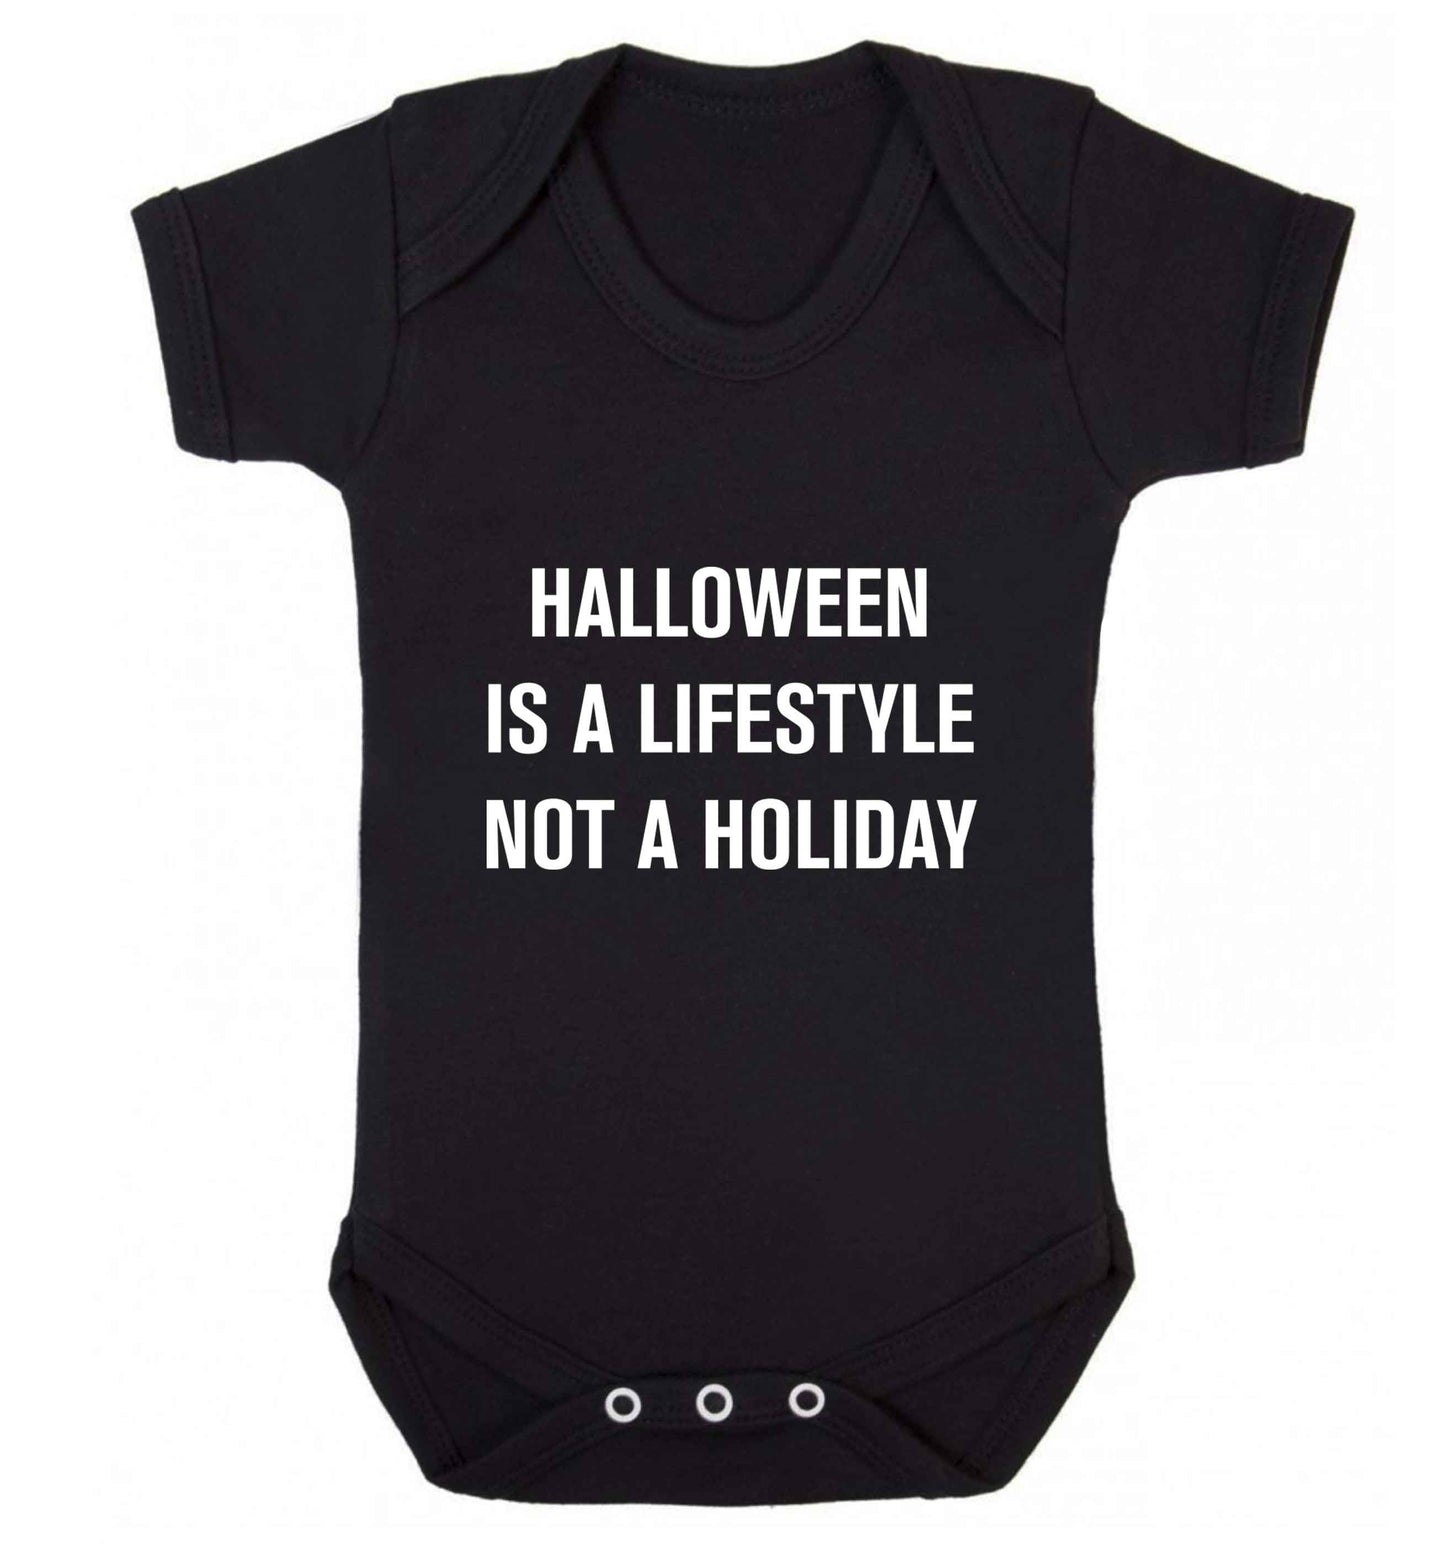 Halloween is a lifestyle not a holiday baby vest black 18-24 months